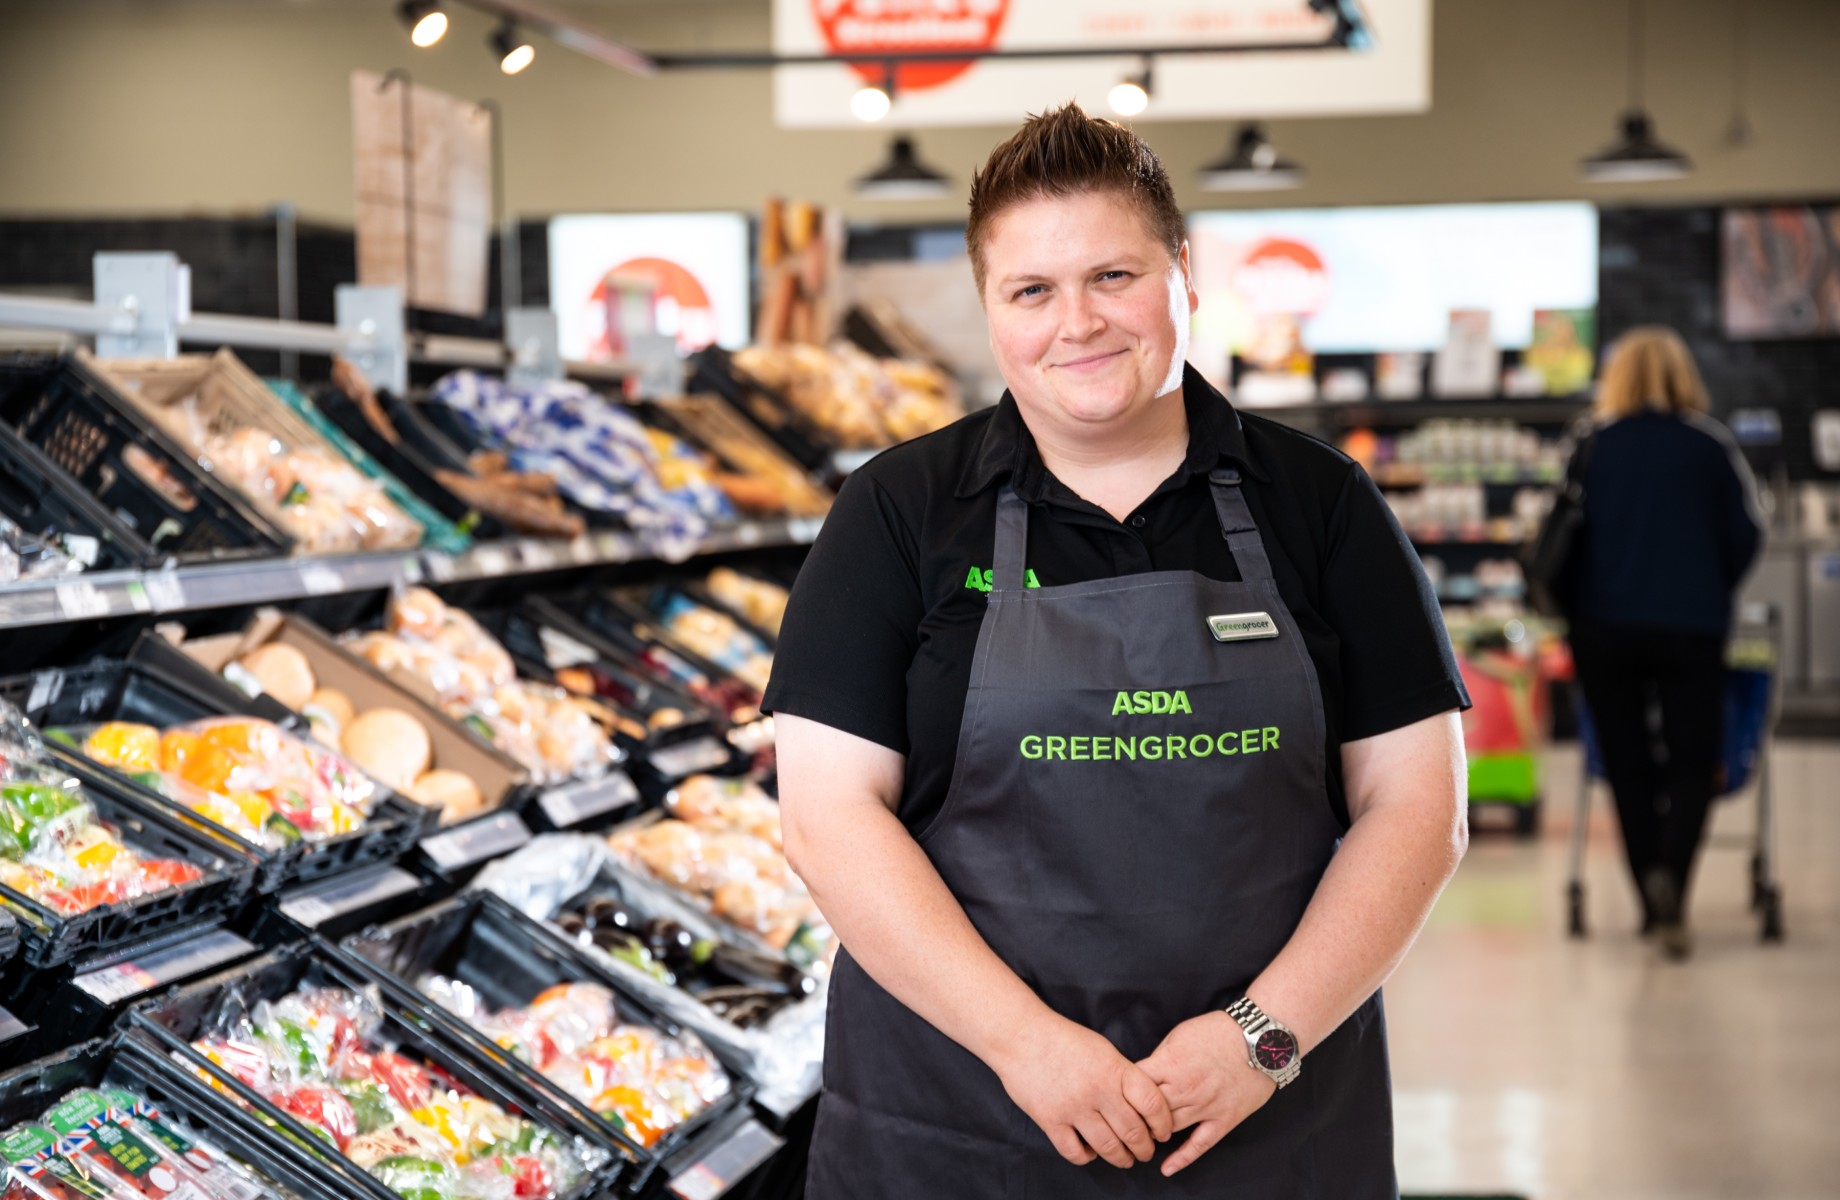 Asda has hired special greengrocers in stores